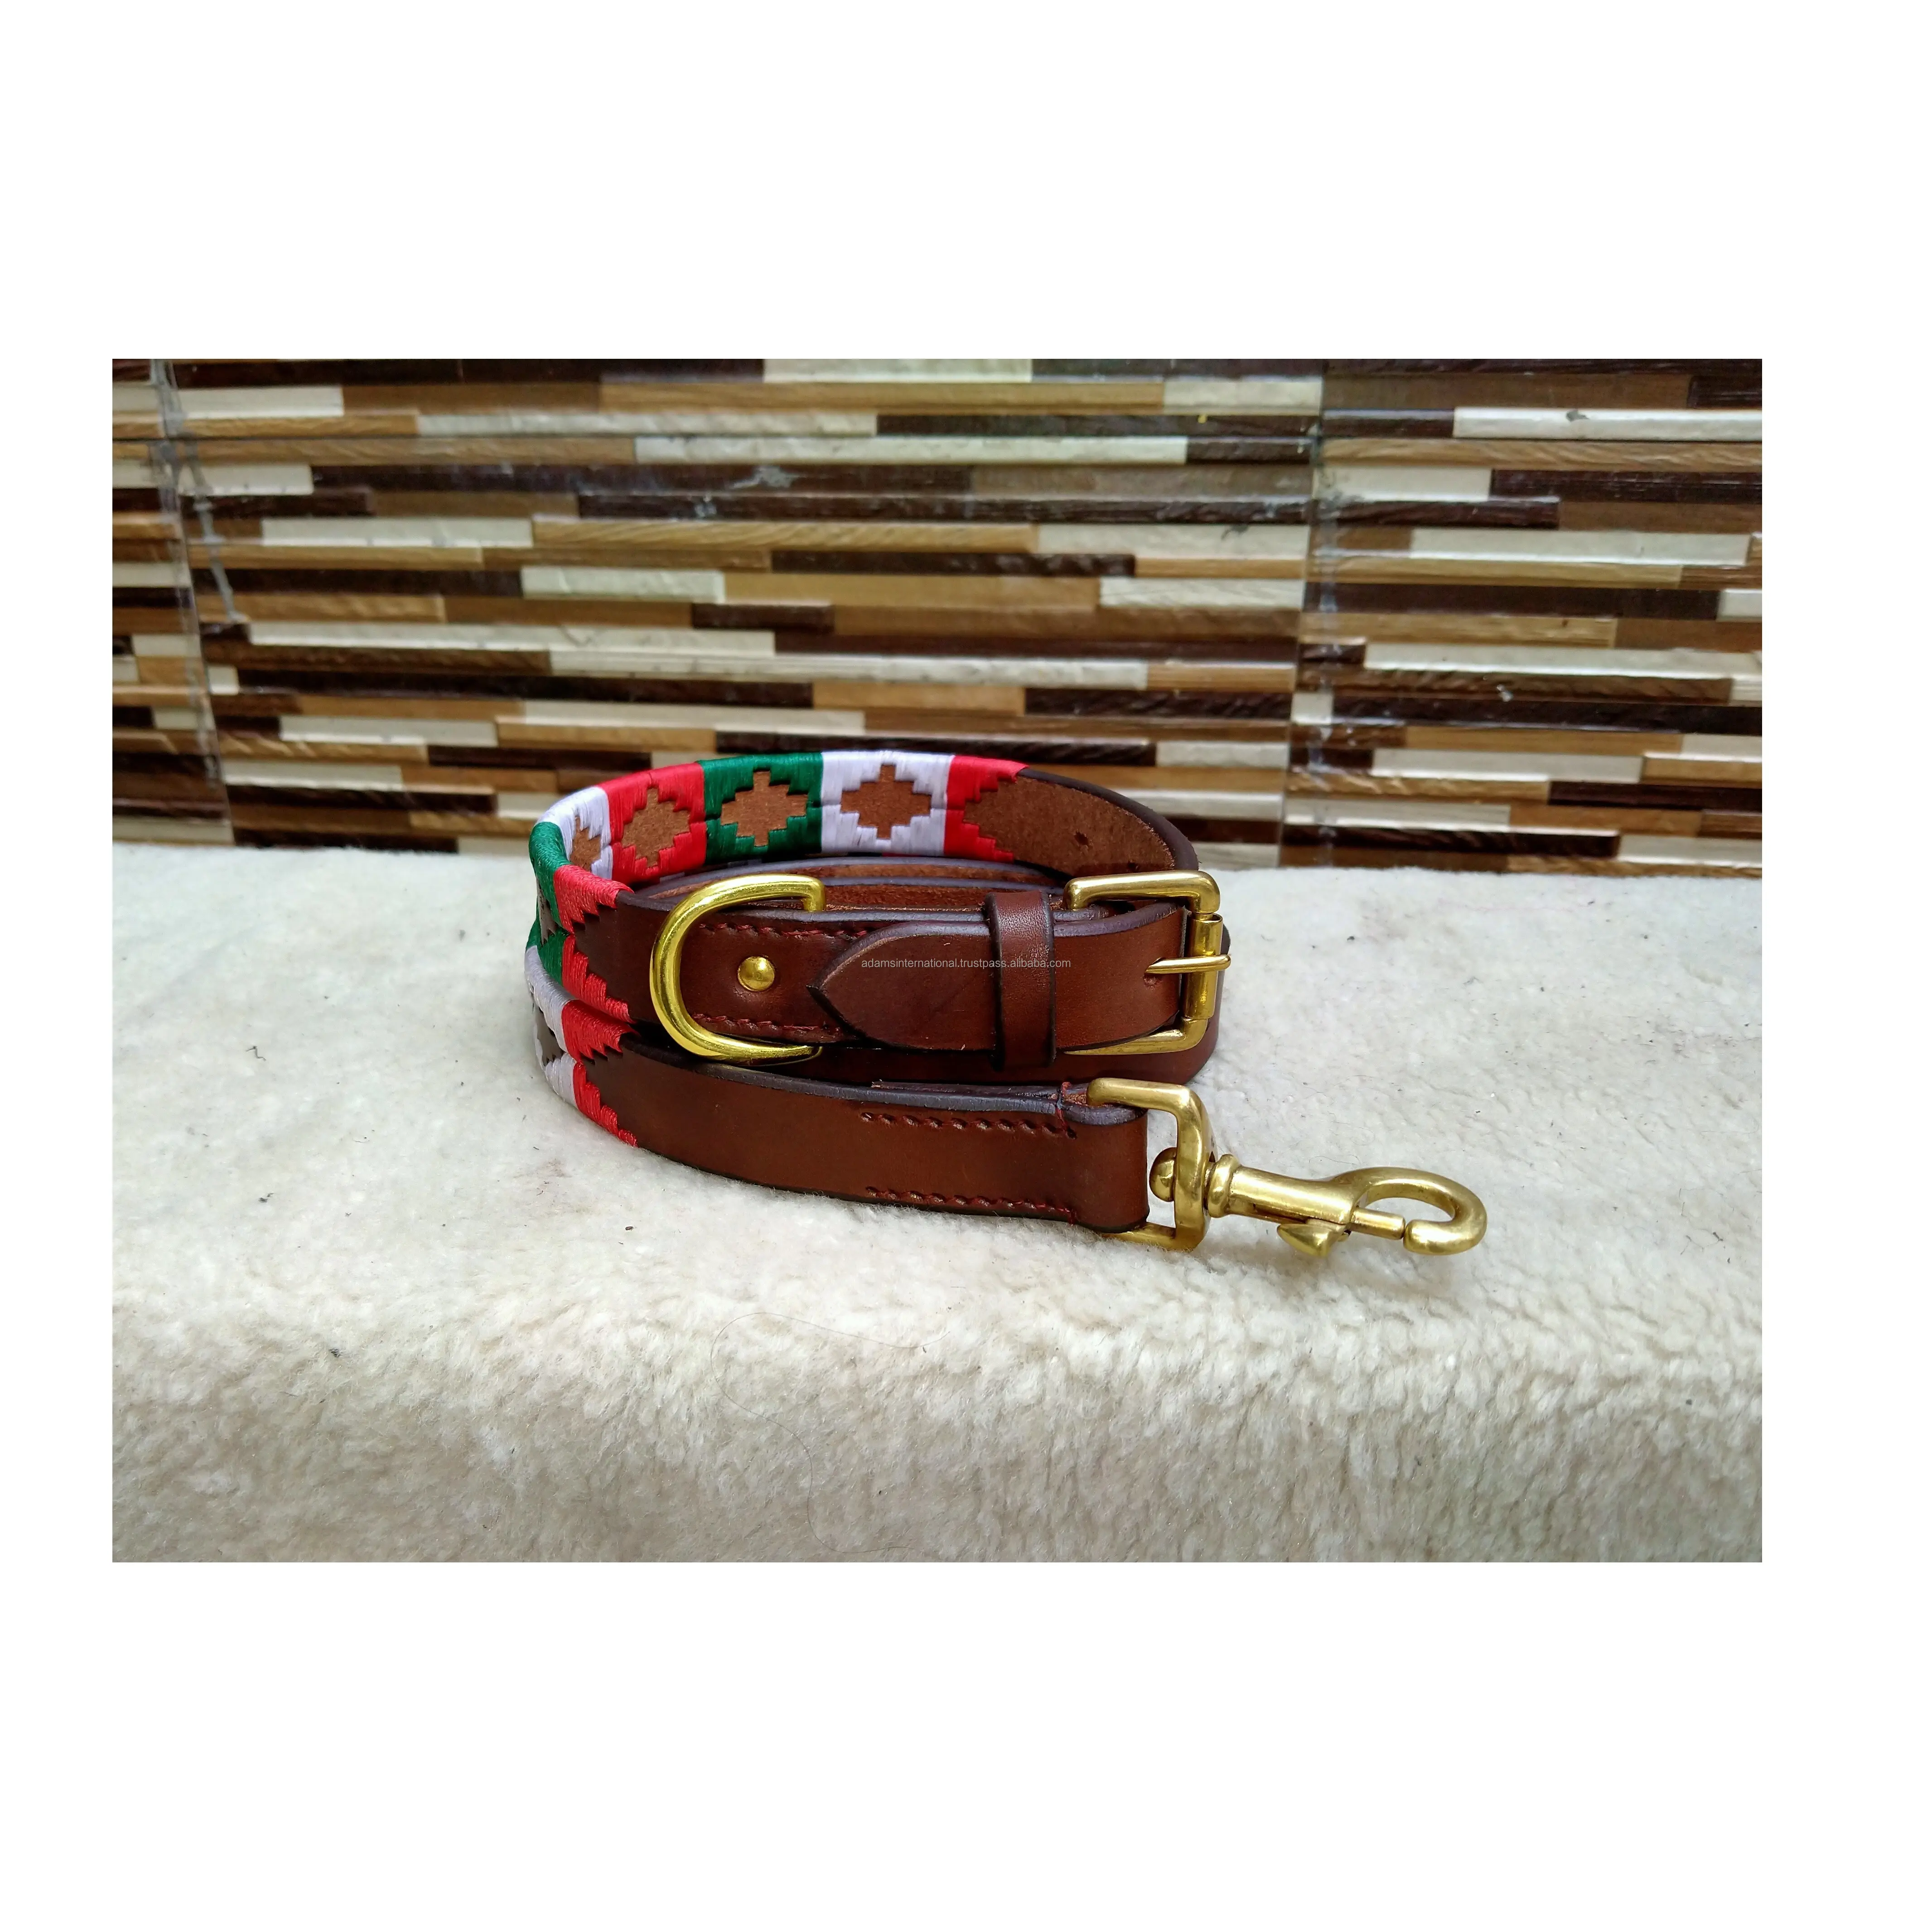 Top Quality - Polo Dog Collar and Leash - American Cow Leather - Solid Brass Hardware - 6 mm thick soft oily leather